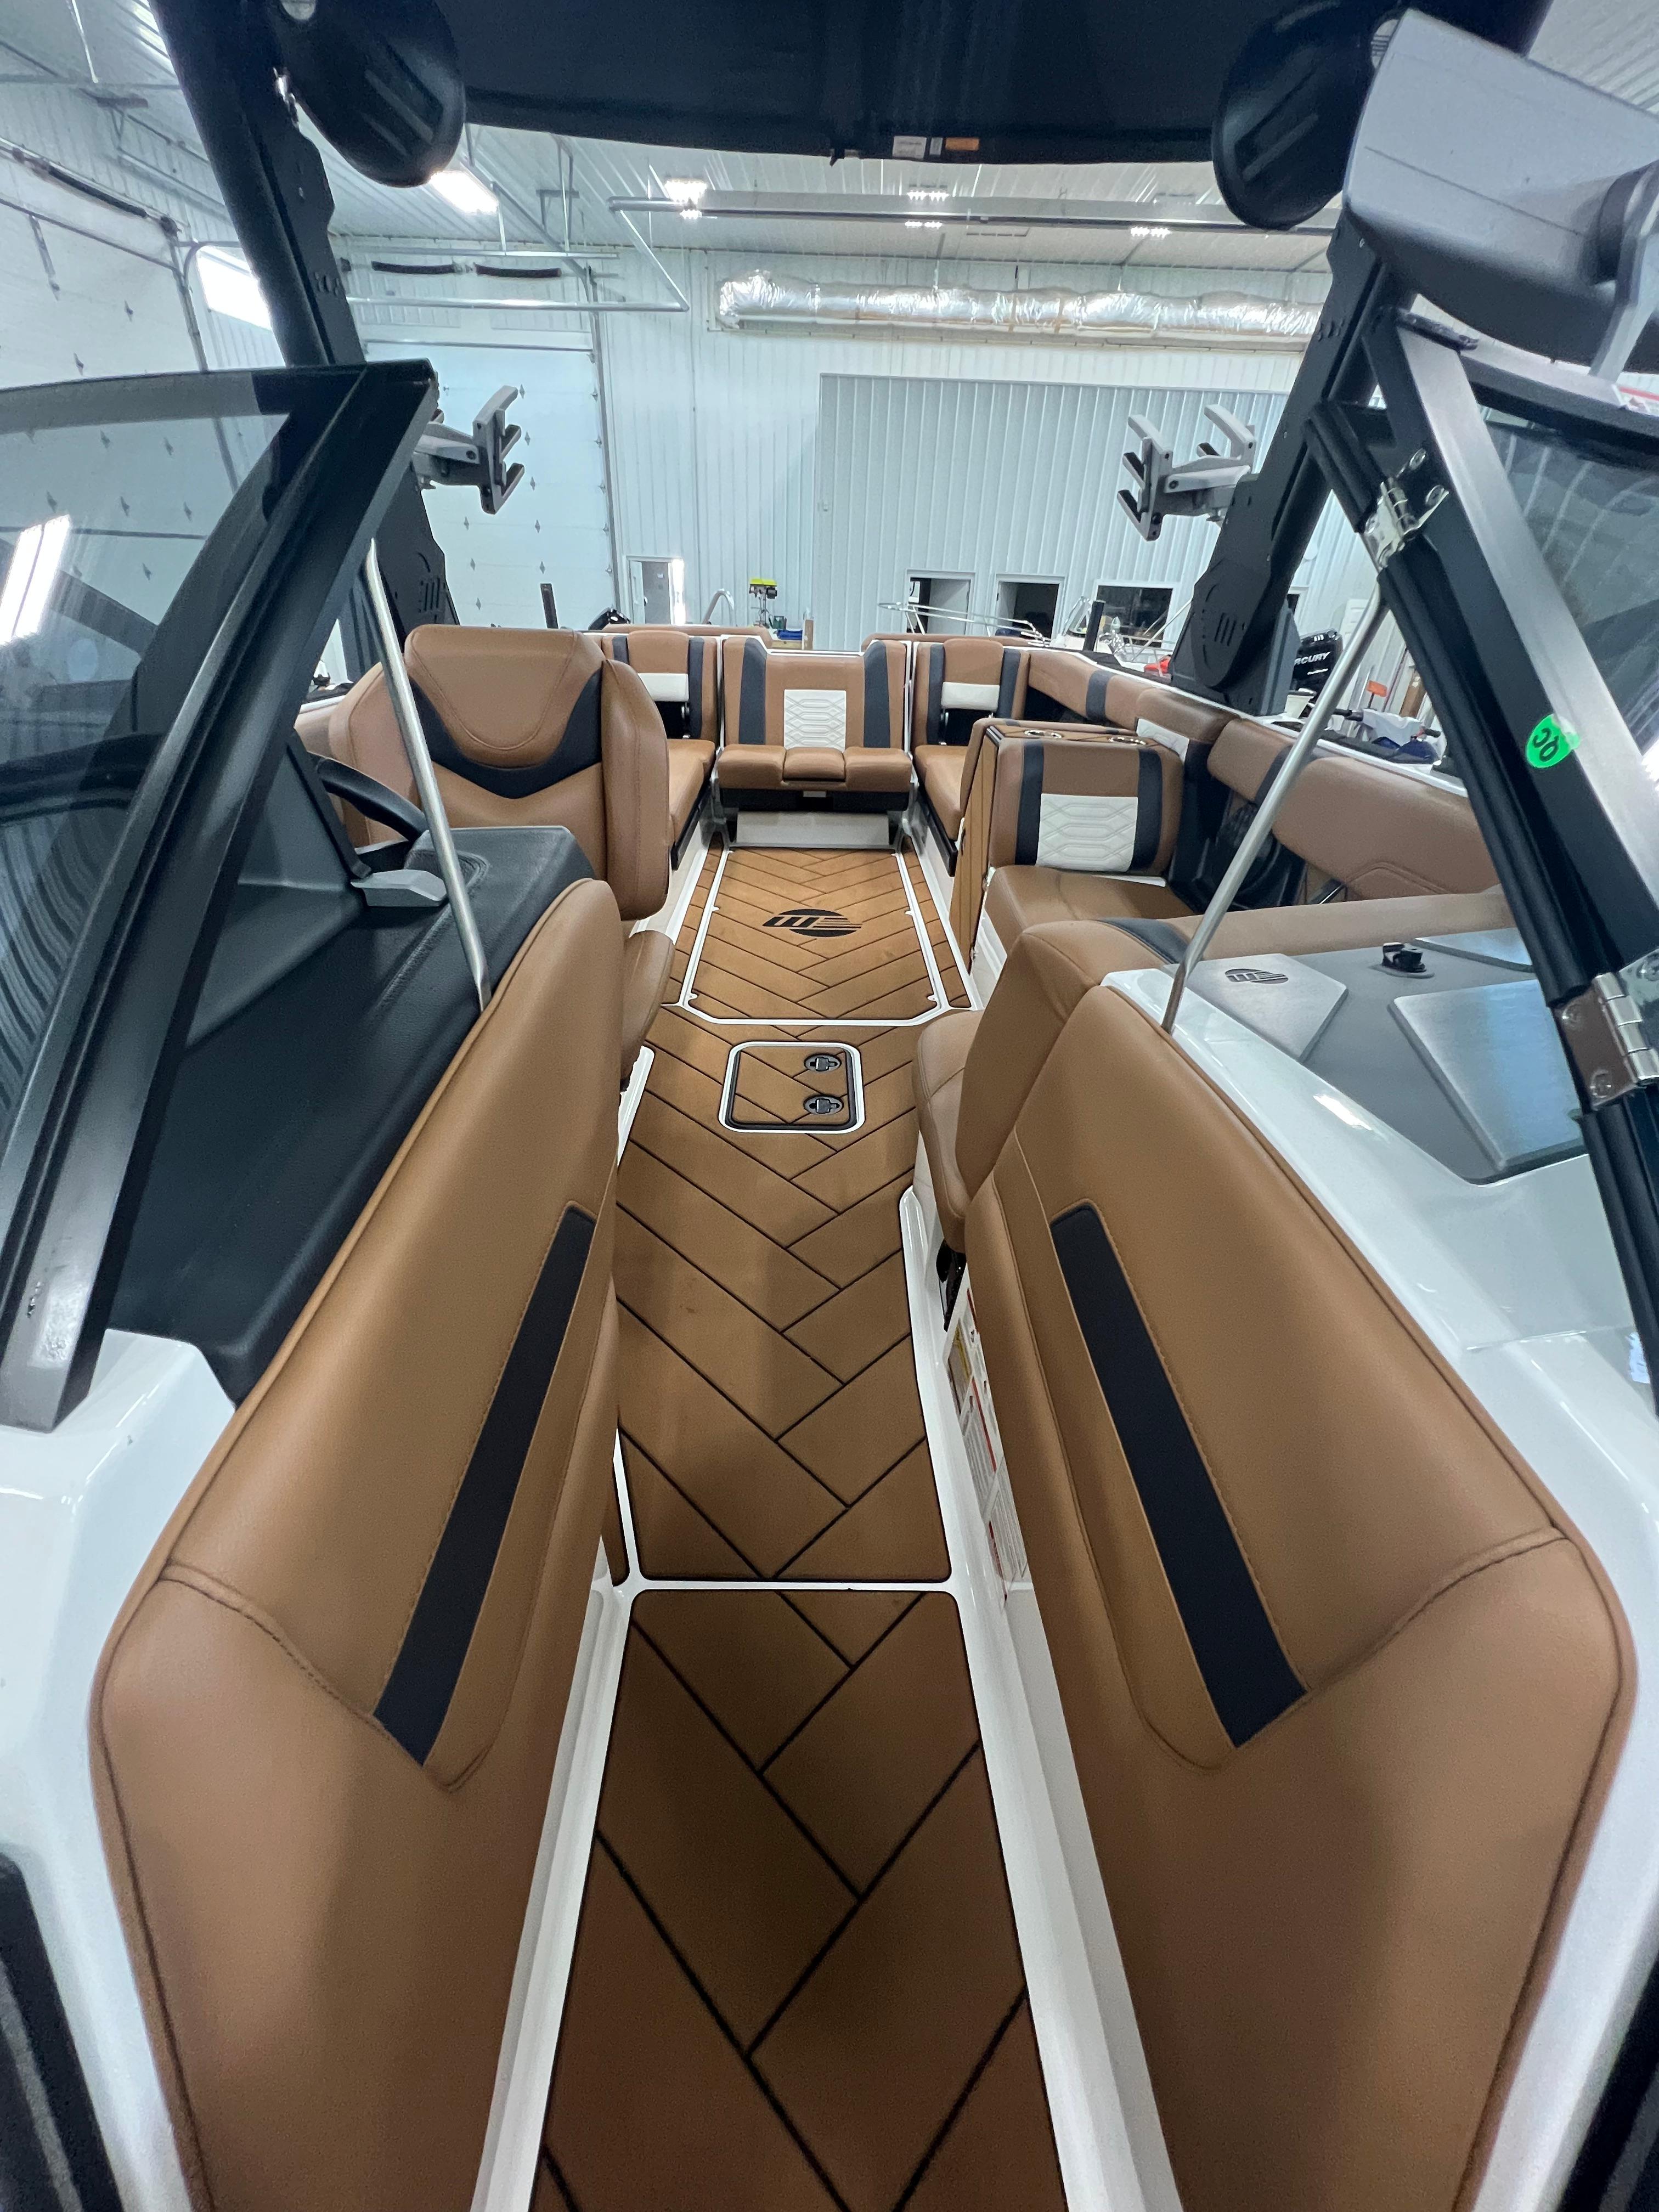 Bow Area looking aft